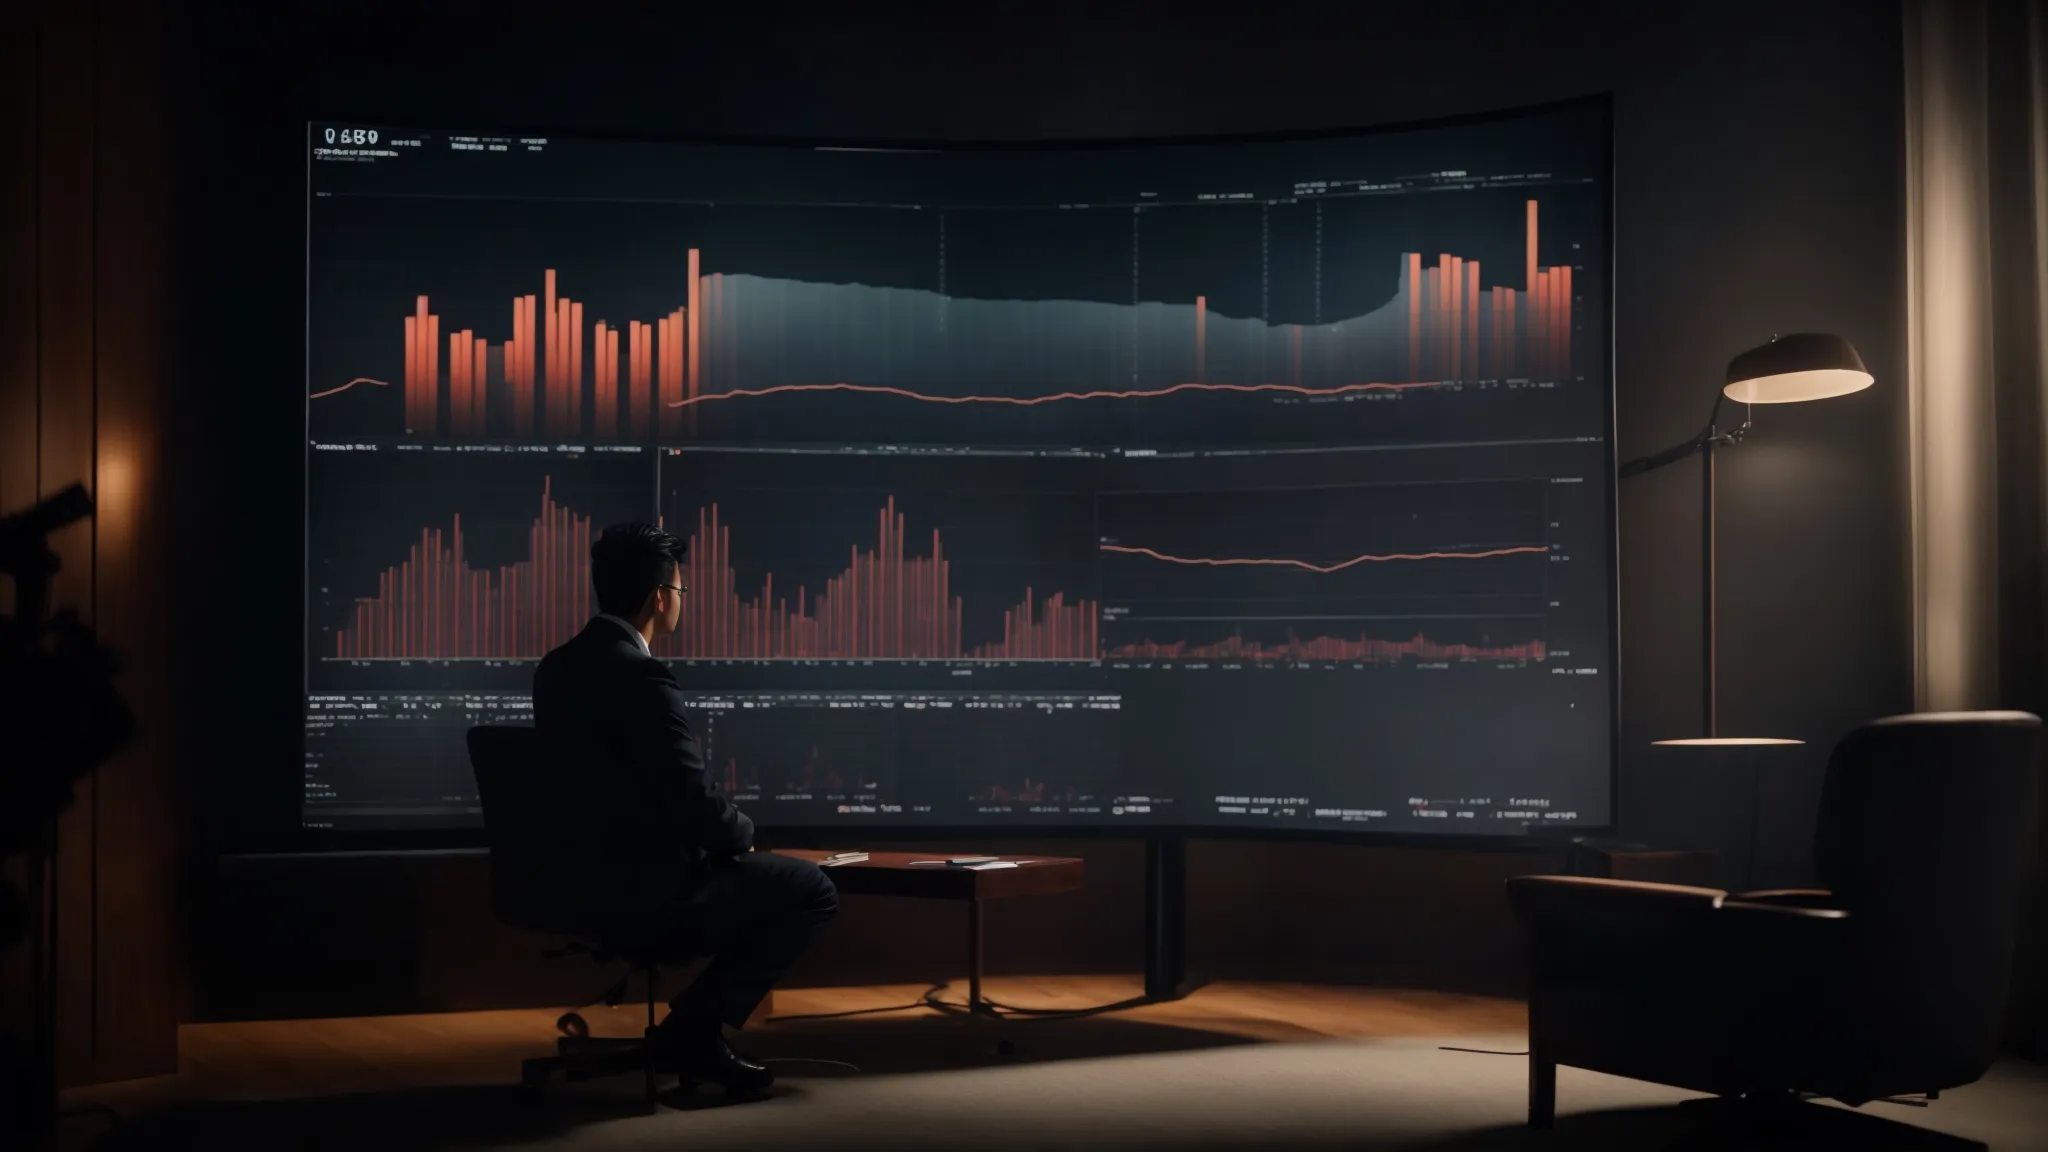 a digital screen displaying charts and graphs analyzing trends, with a shadowy figure pondering over it in a dimly lit room.